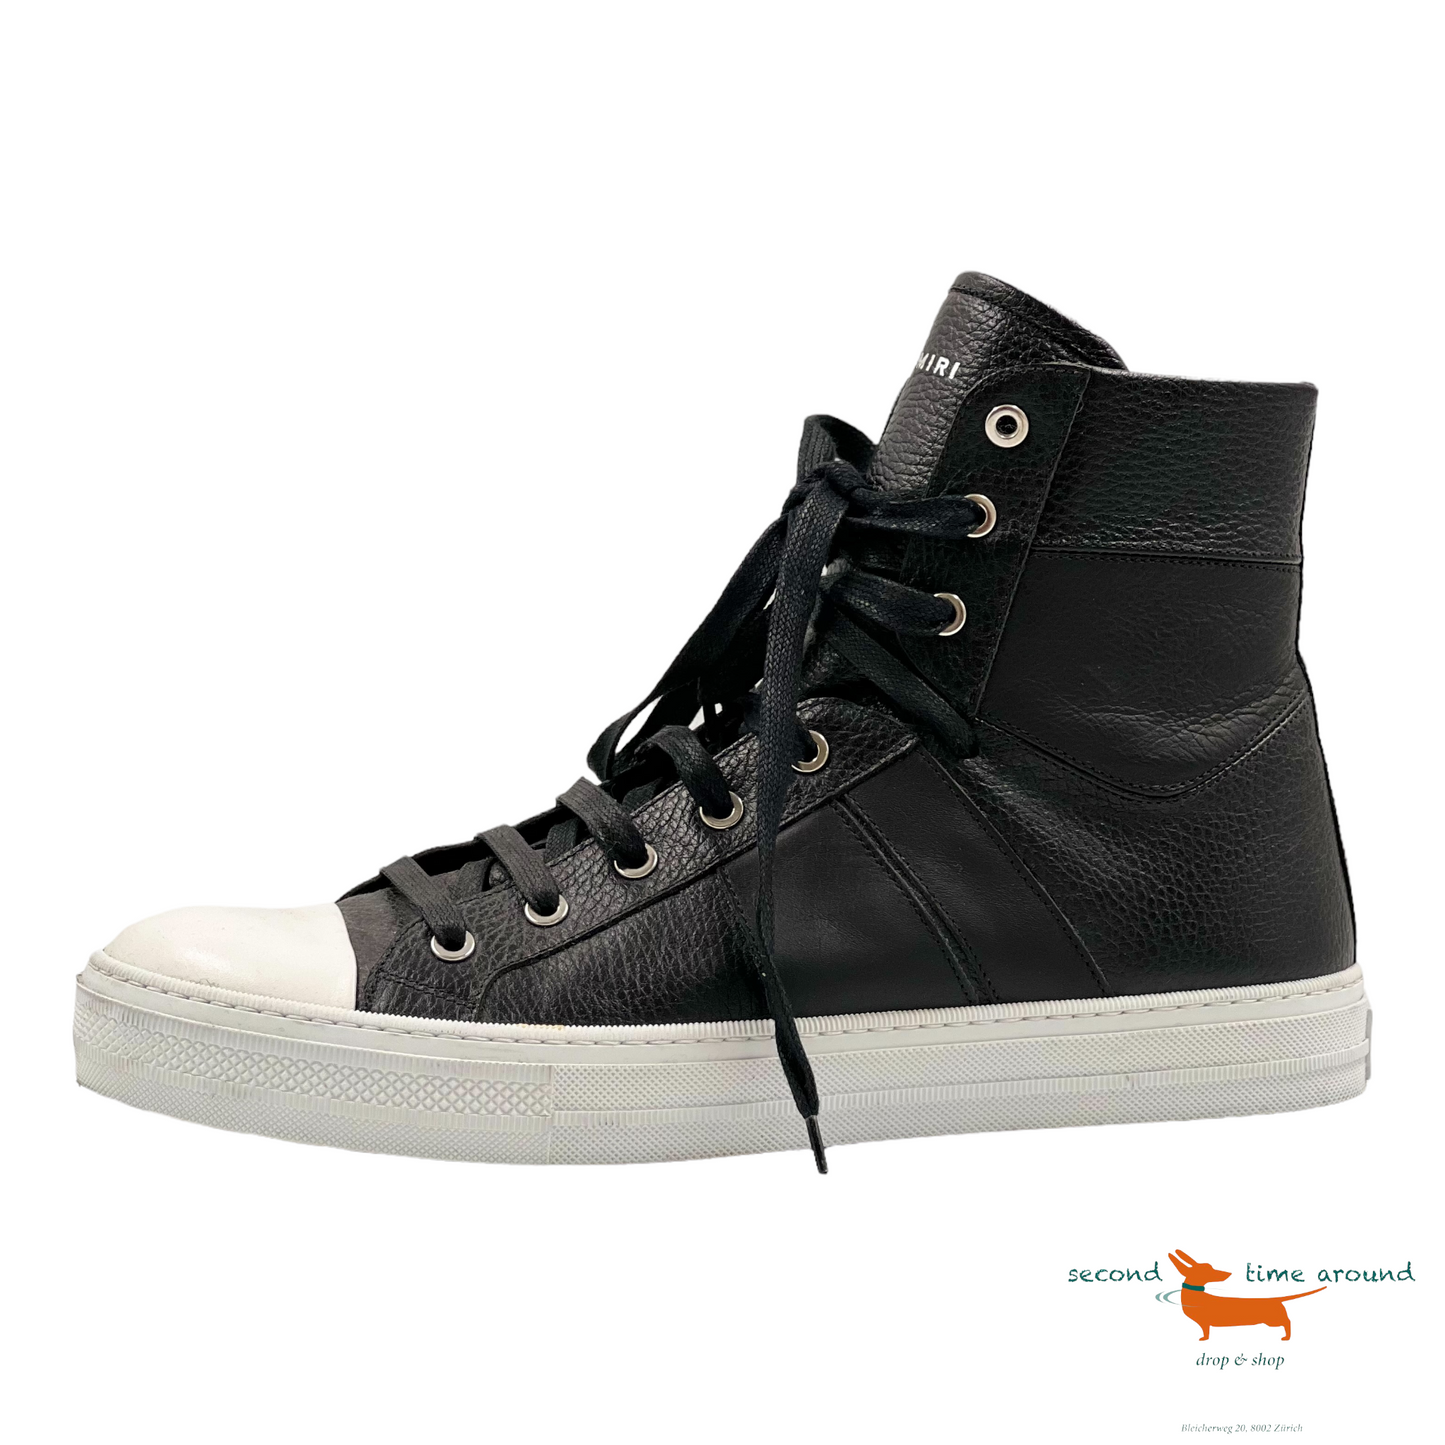 Amiri Black leather sunset lace high top Sneaker